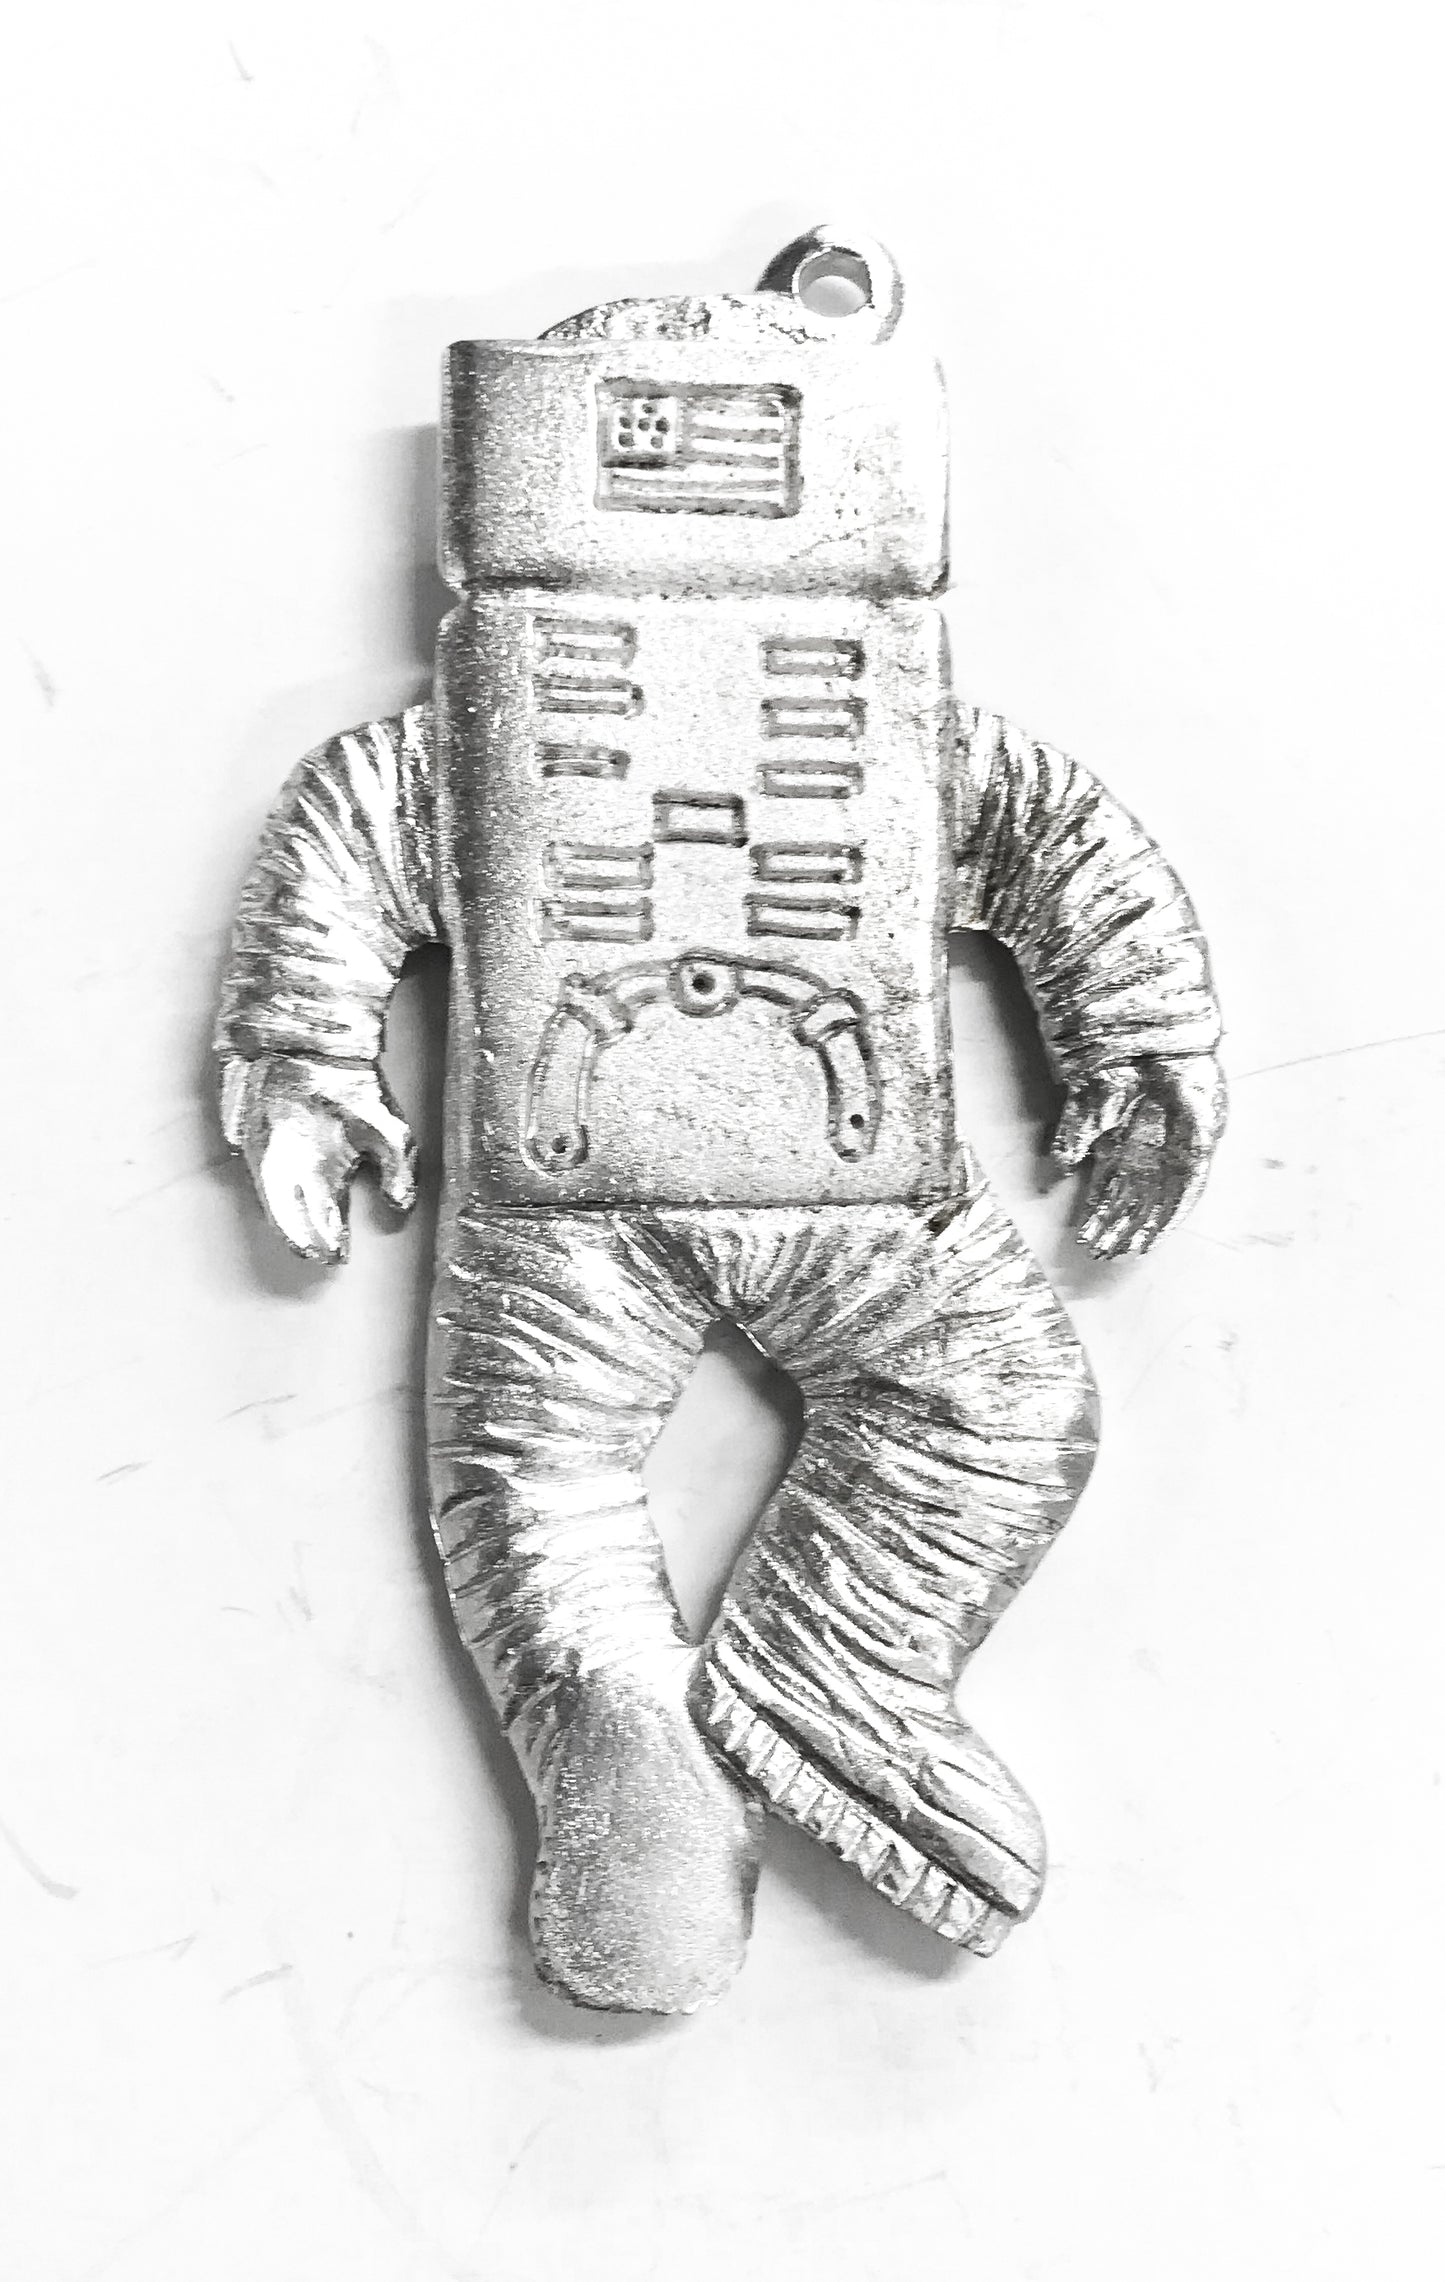 Astronaut Christmas Ornament - Space Party Favors for Girls Birthday - Bulk Prices